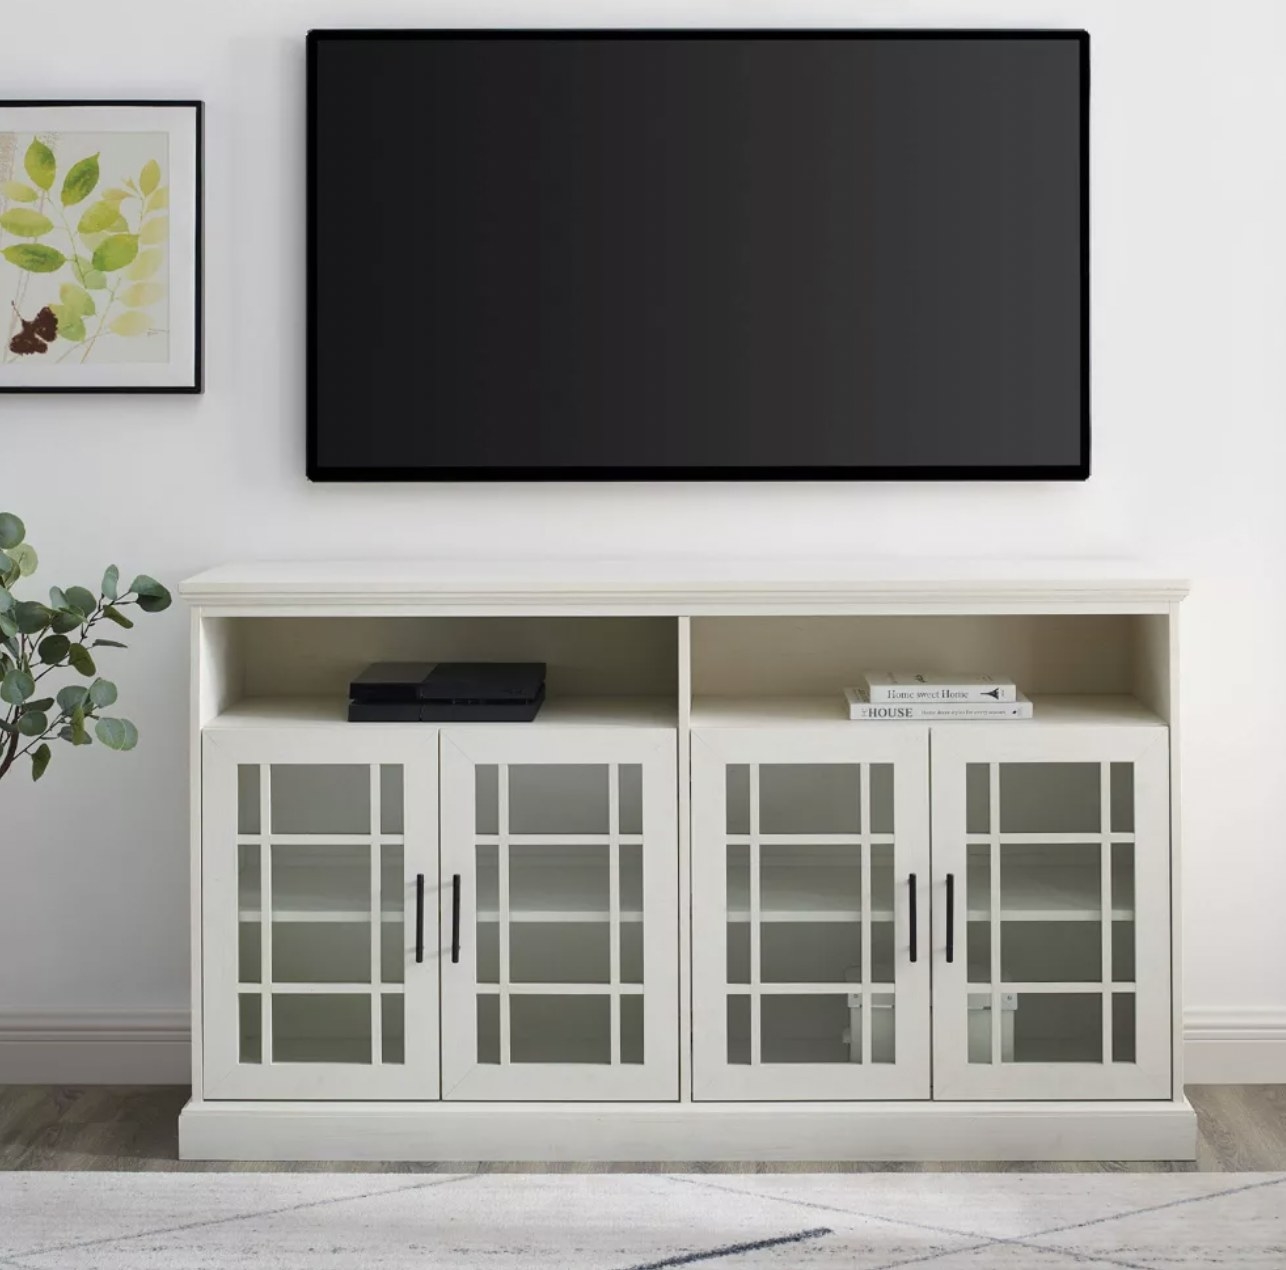 The white stand with TV mounted on wall